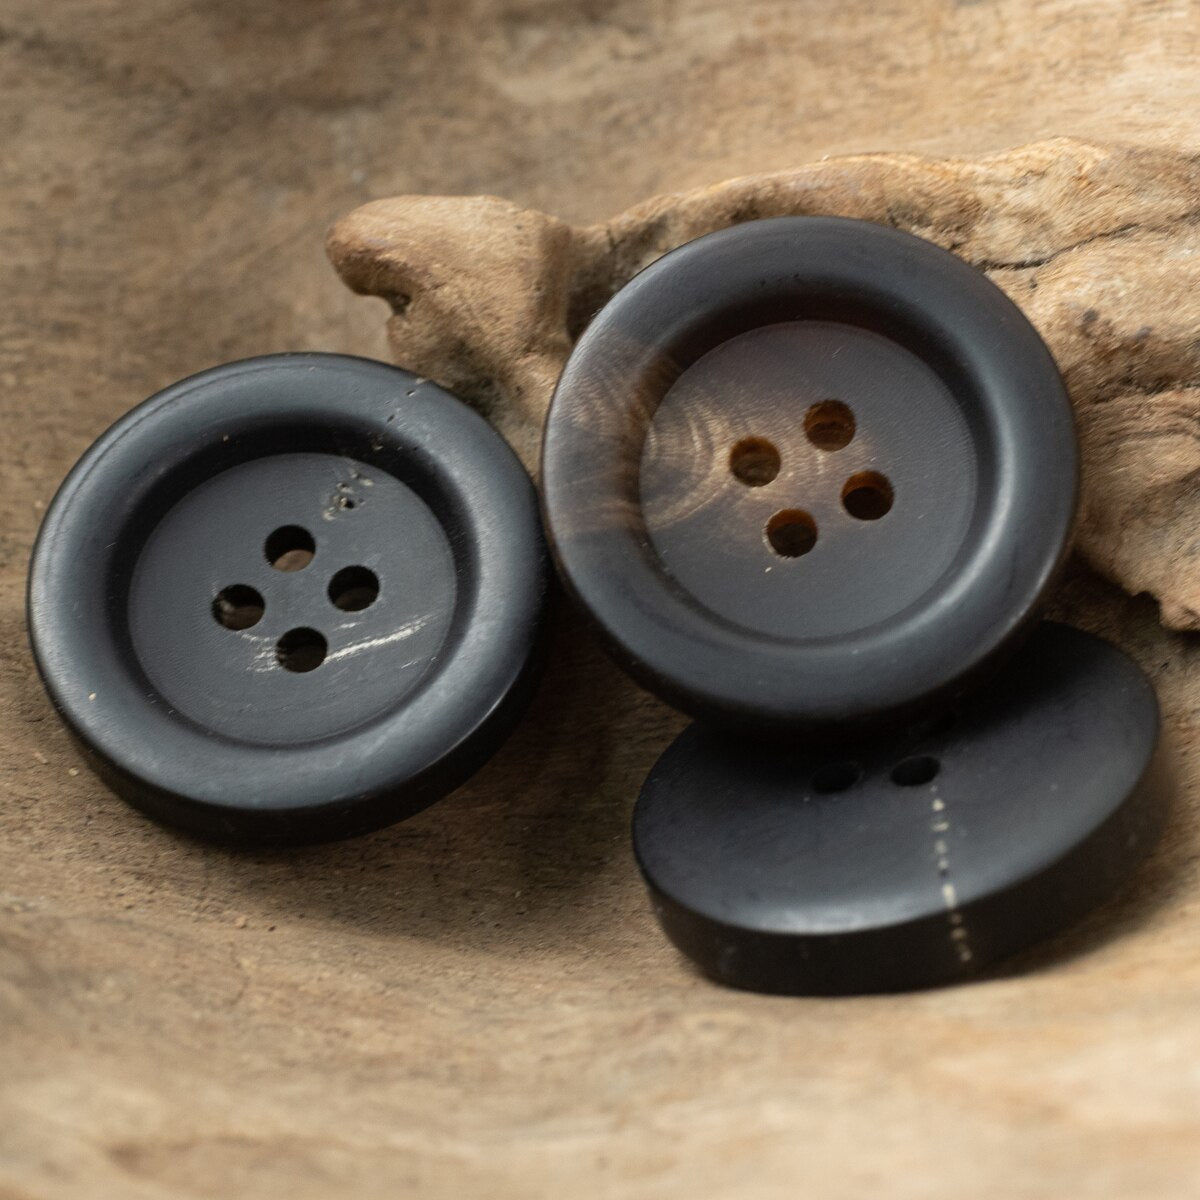 6pcs Thick Matte Horn Buttons For Winter Autumn Coat Leather Dark Brown Black Buttons